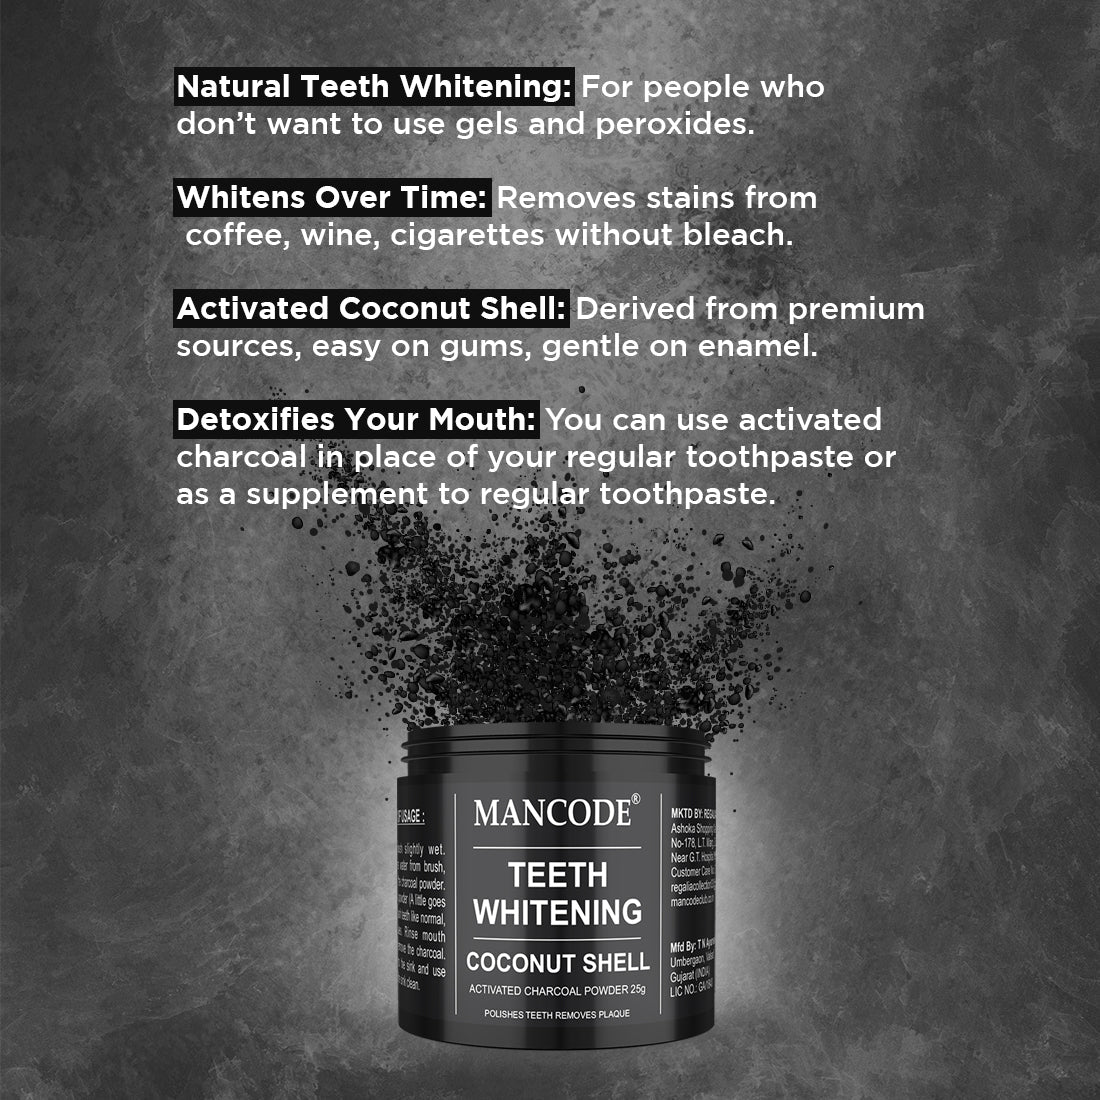 Mancode Coconut Shell Activated Charcoal Powder for Teeth Whitening, 25mg